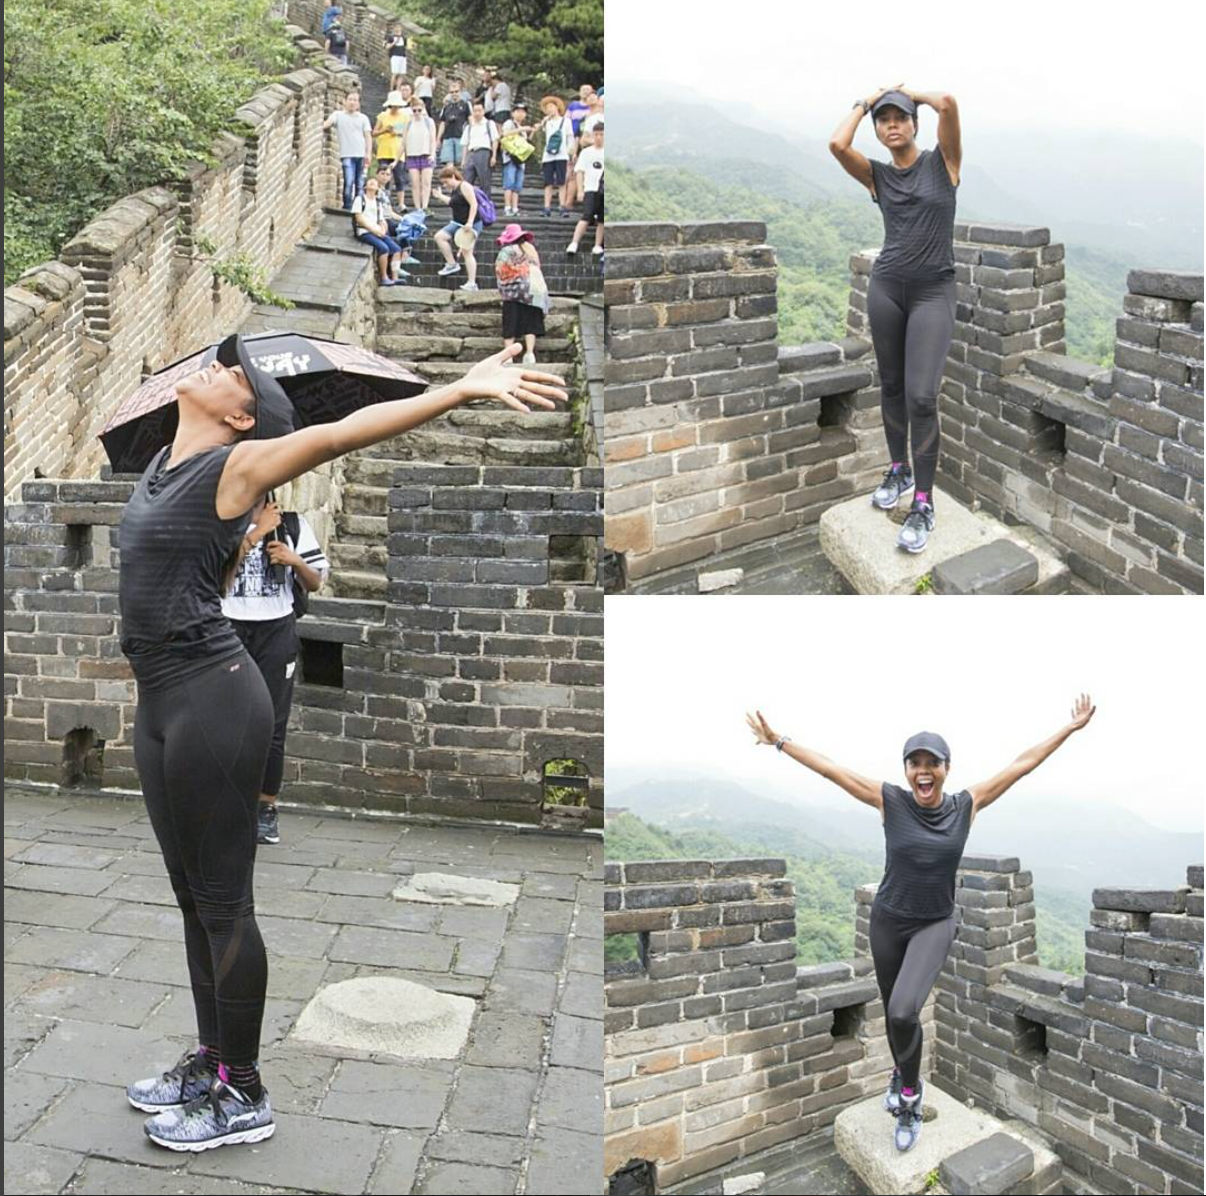 Gabrielle Union Climbs the Great Wall of China, Gives Us Total #TravelGoals!
